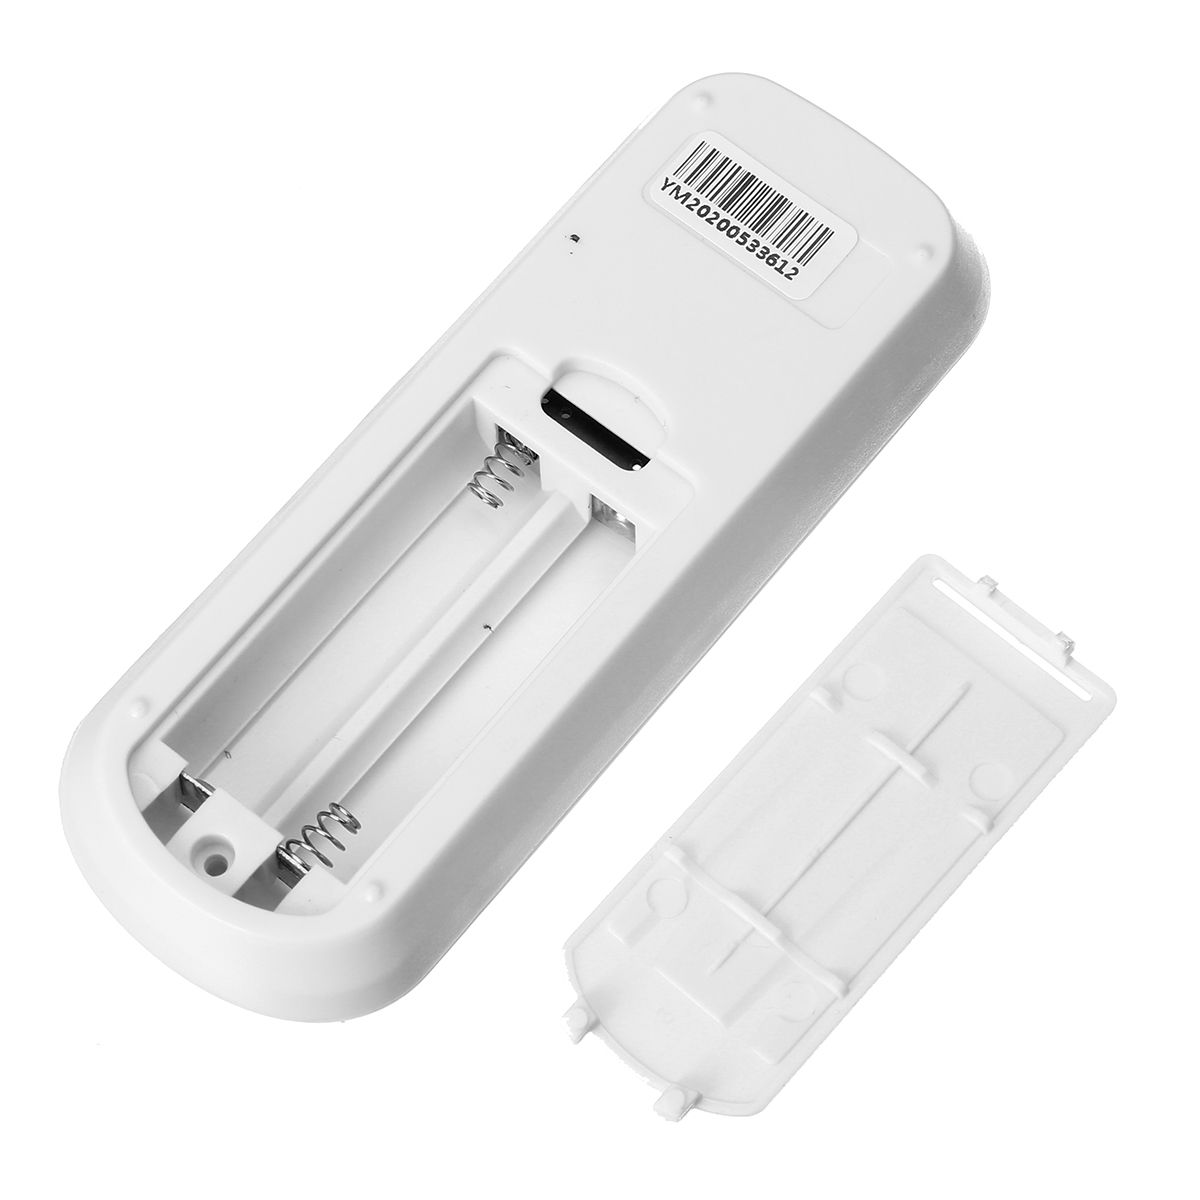 110V220V-Wireless-Remote-Control-E27-Lamp-Holder-Bulb-Adapter-With-Timer-Function-1691277